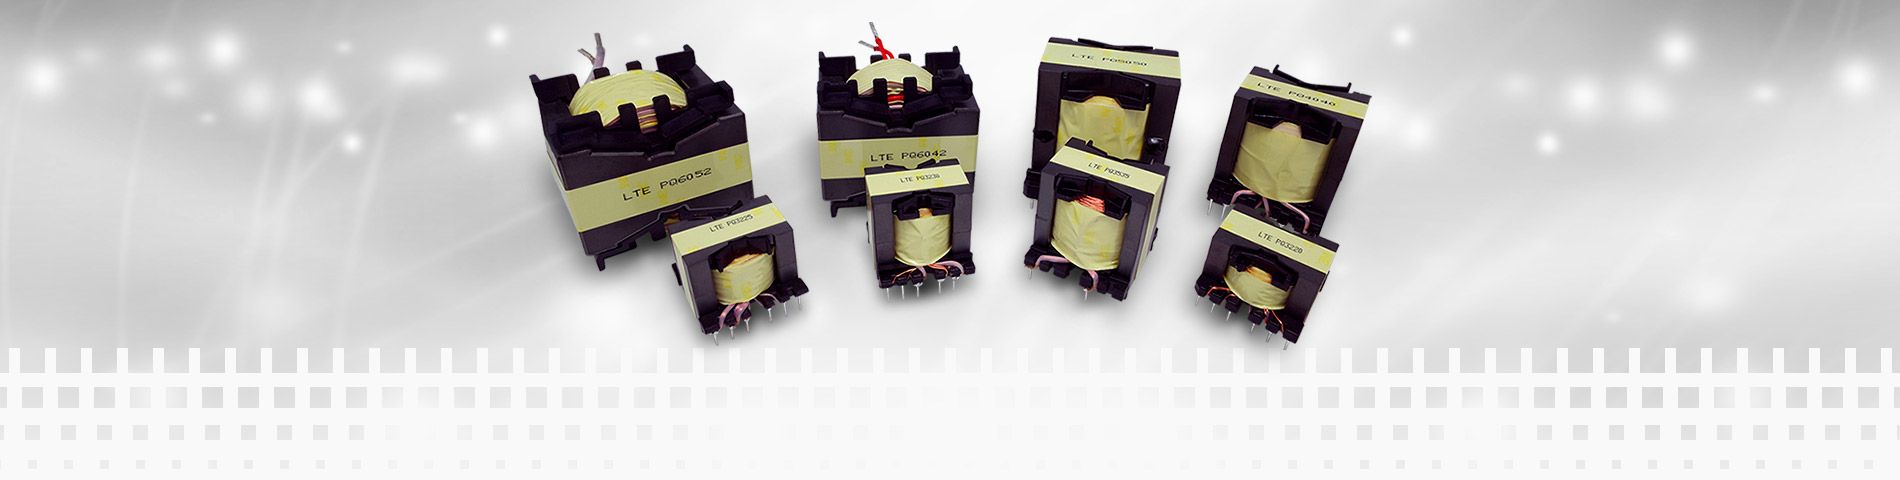 Transformer the heart of Switching Power Supply